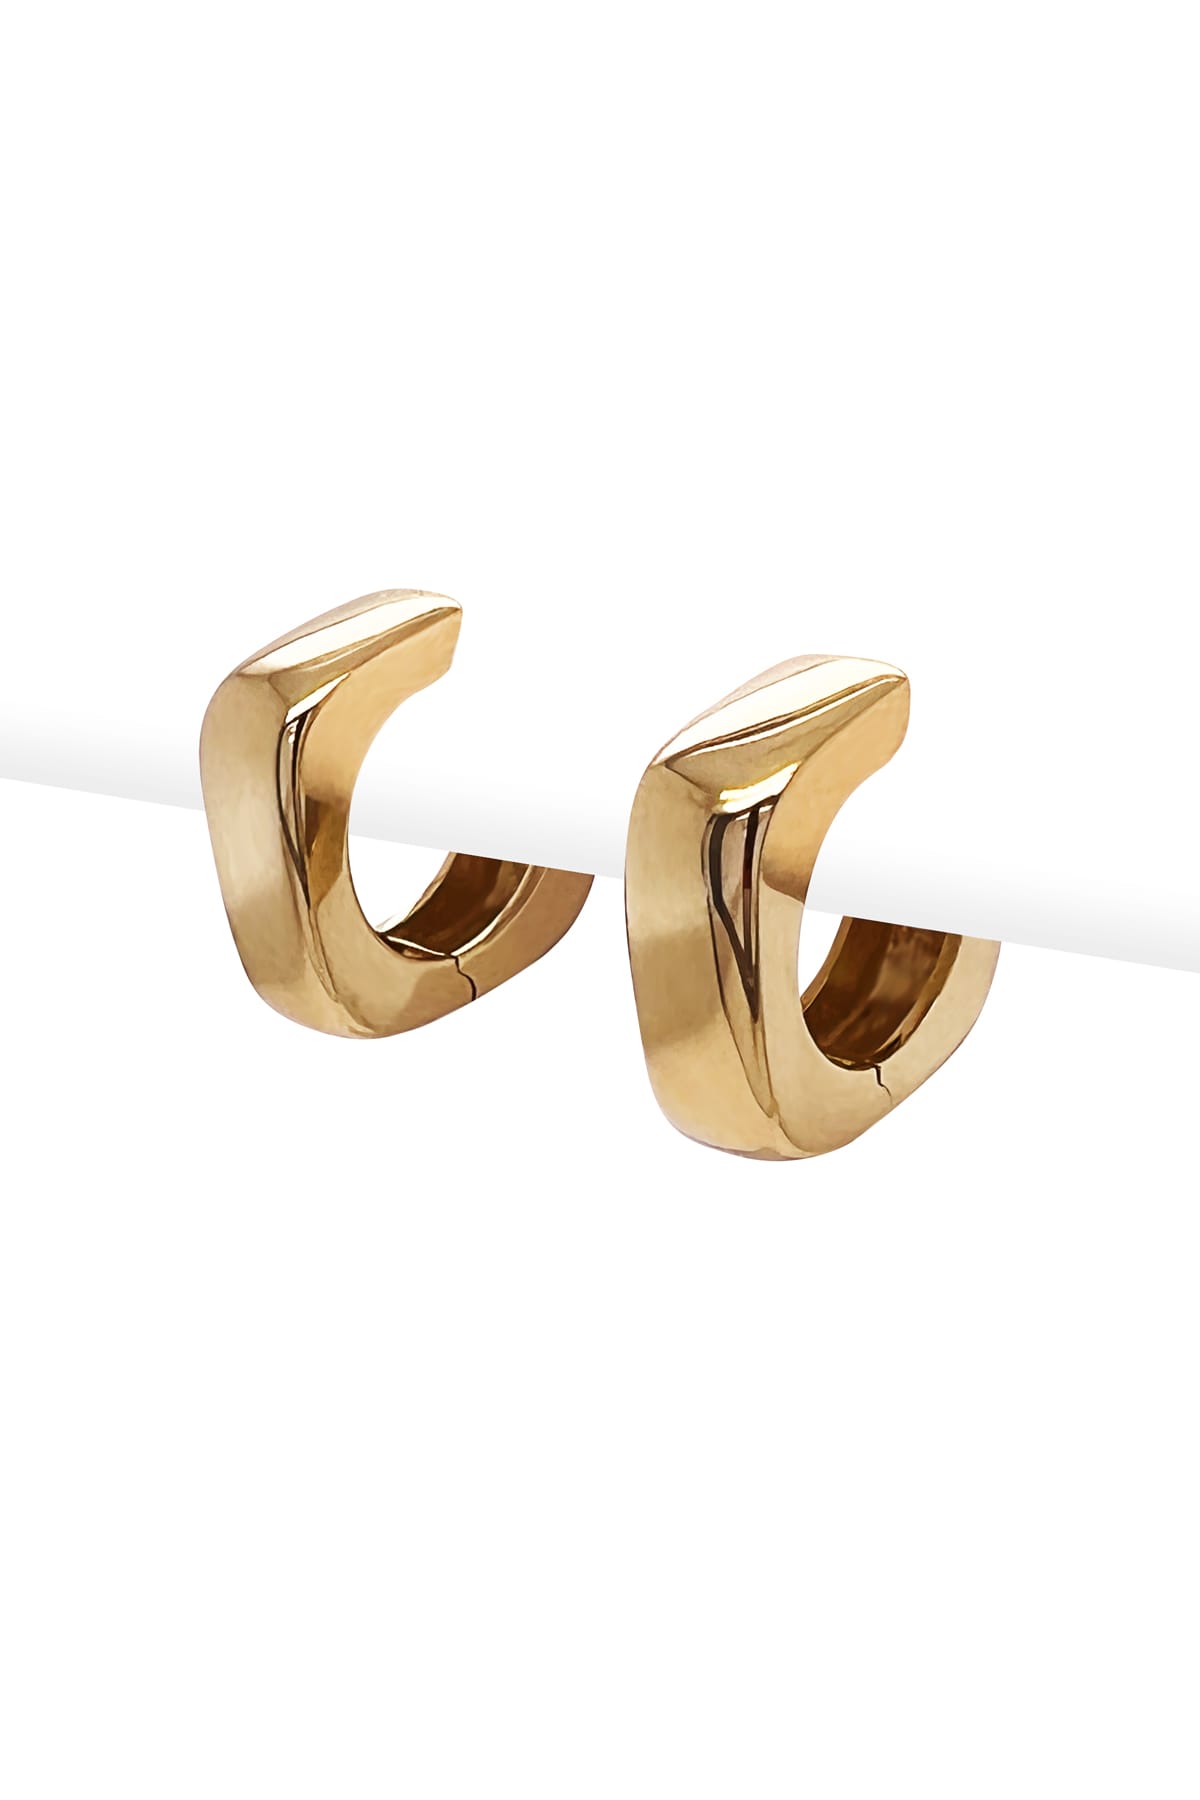 9ct Yellow Gold Fancy Square Style Huggie Earrings available at LeGassick Diamonds and Jewellery Gold Coast, Australia.